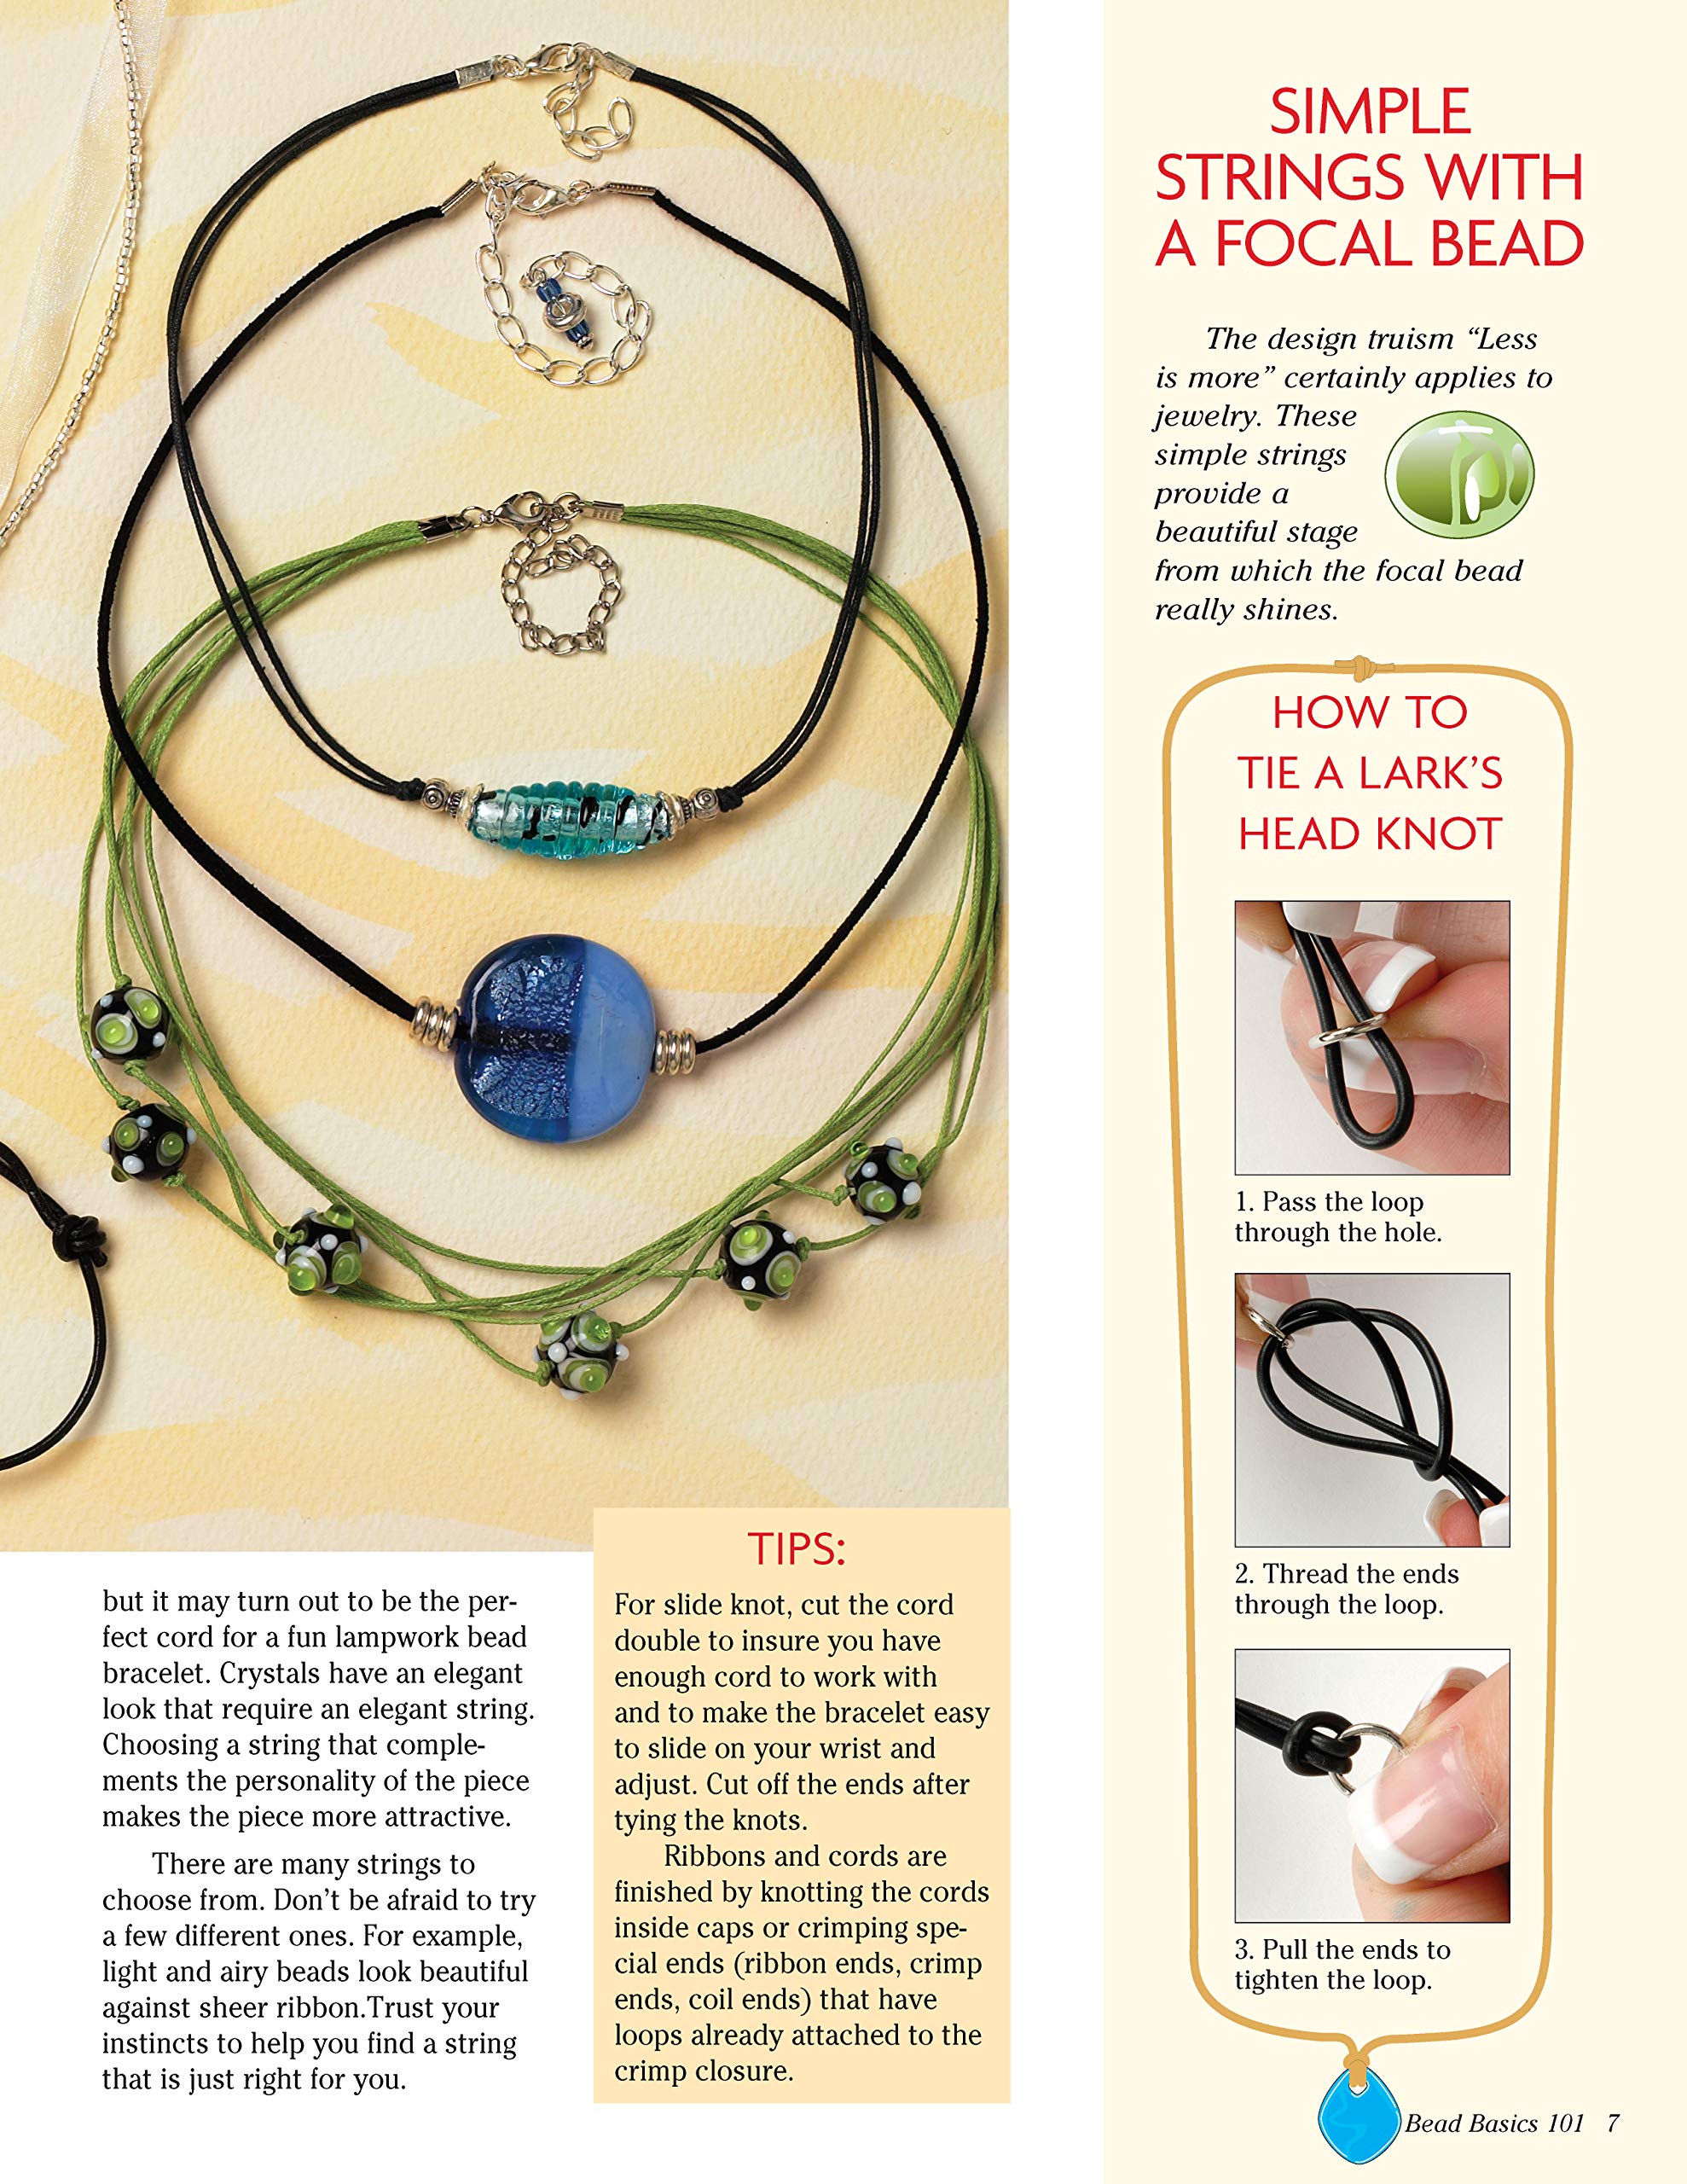 Bead Basics 101: All You Need To Know About Stringing, Findings, Tools (Design Originals) Beading Details on Clasps, Knots, Jump Rings, Bead Sizing, Wire, Using a Bead Board, Spirals, Dangles, & More